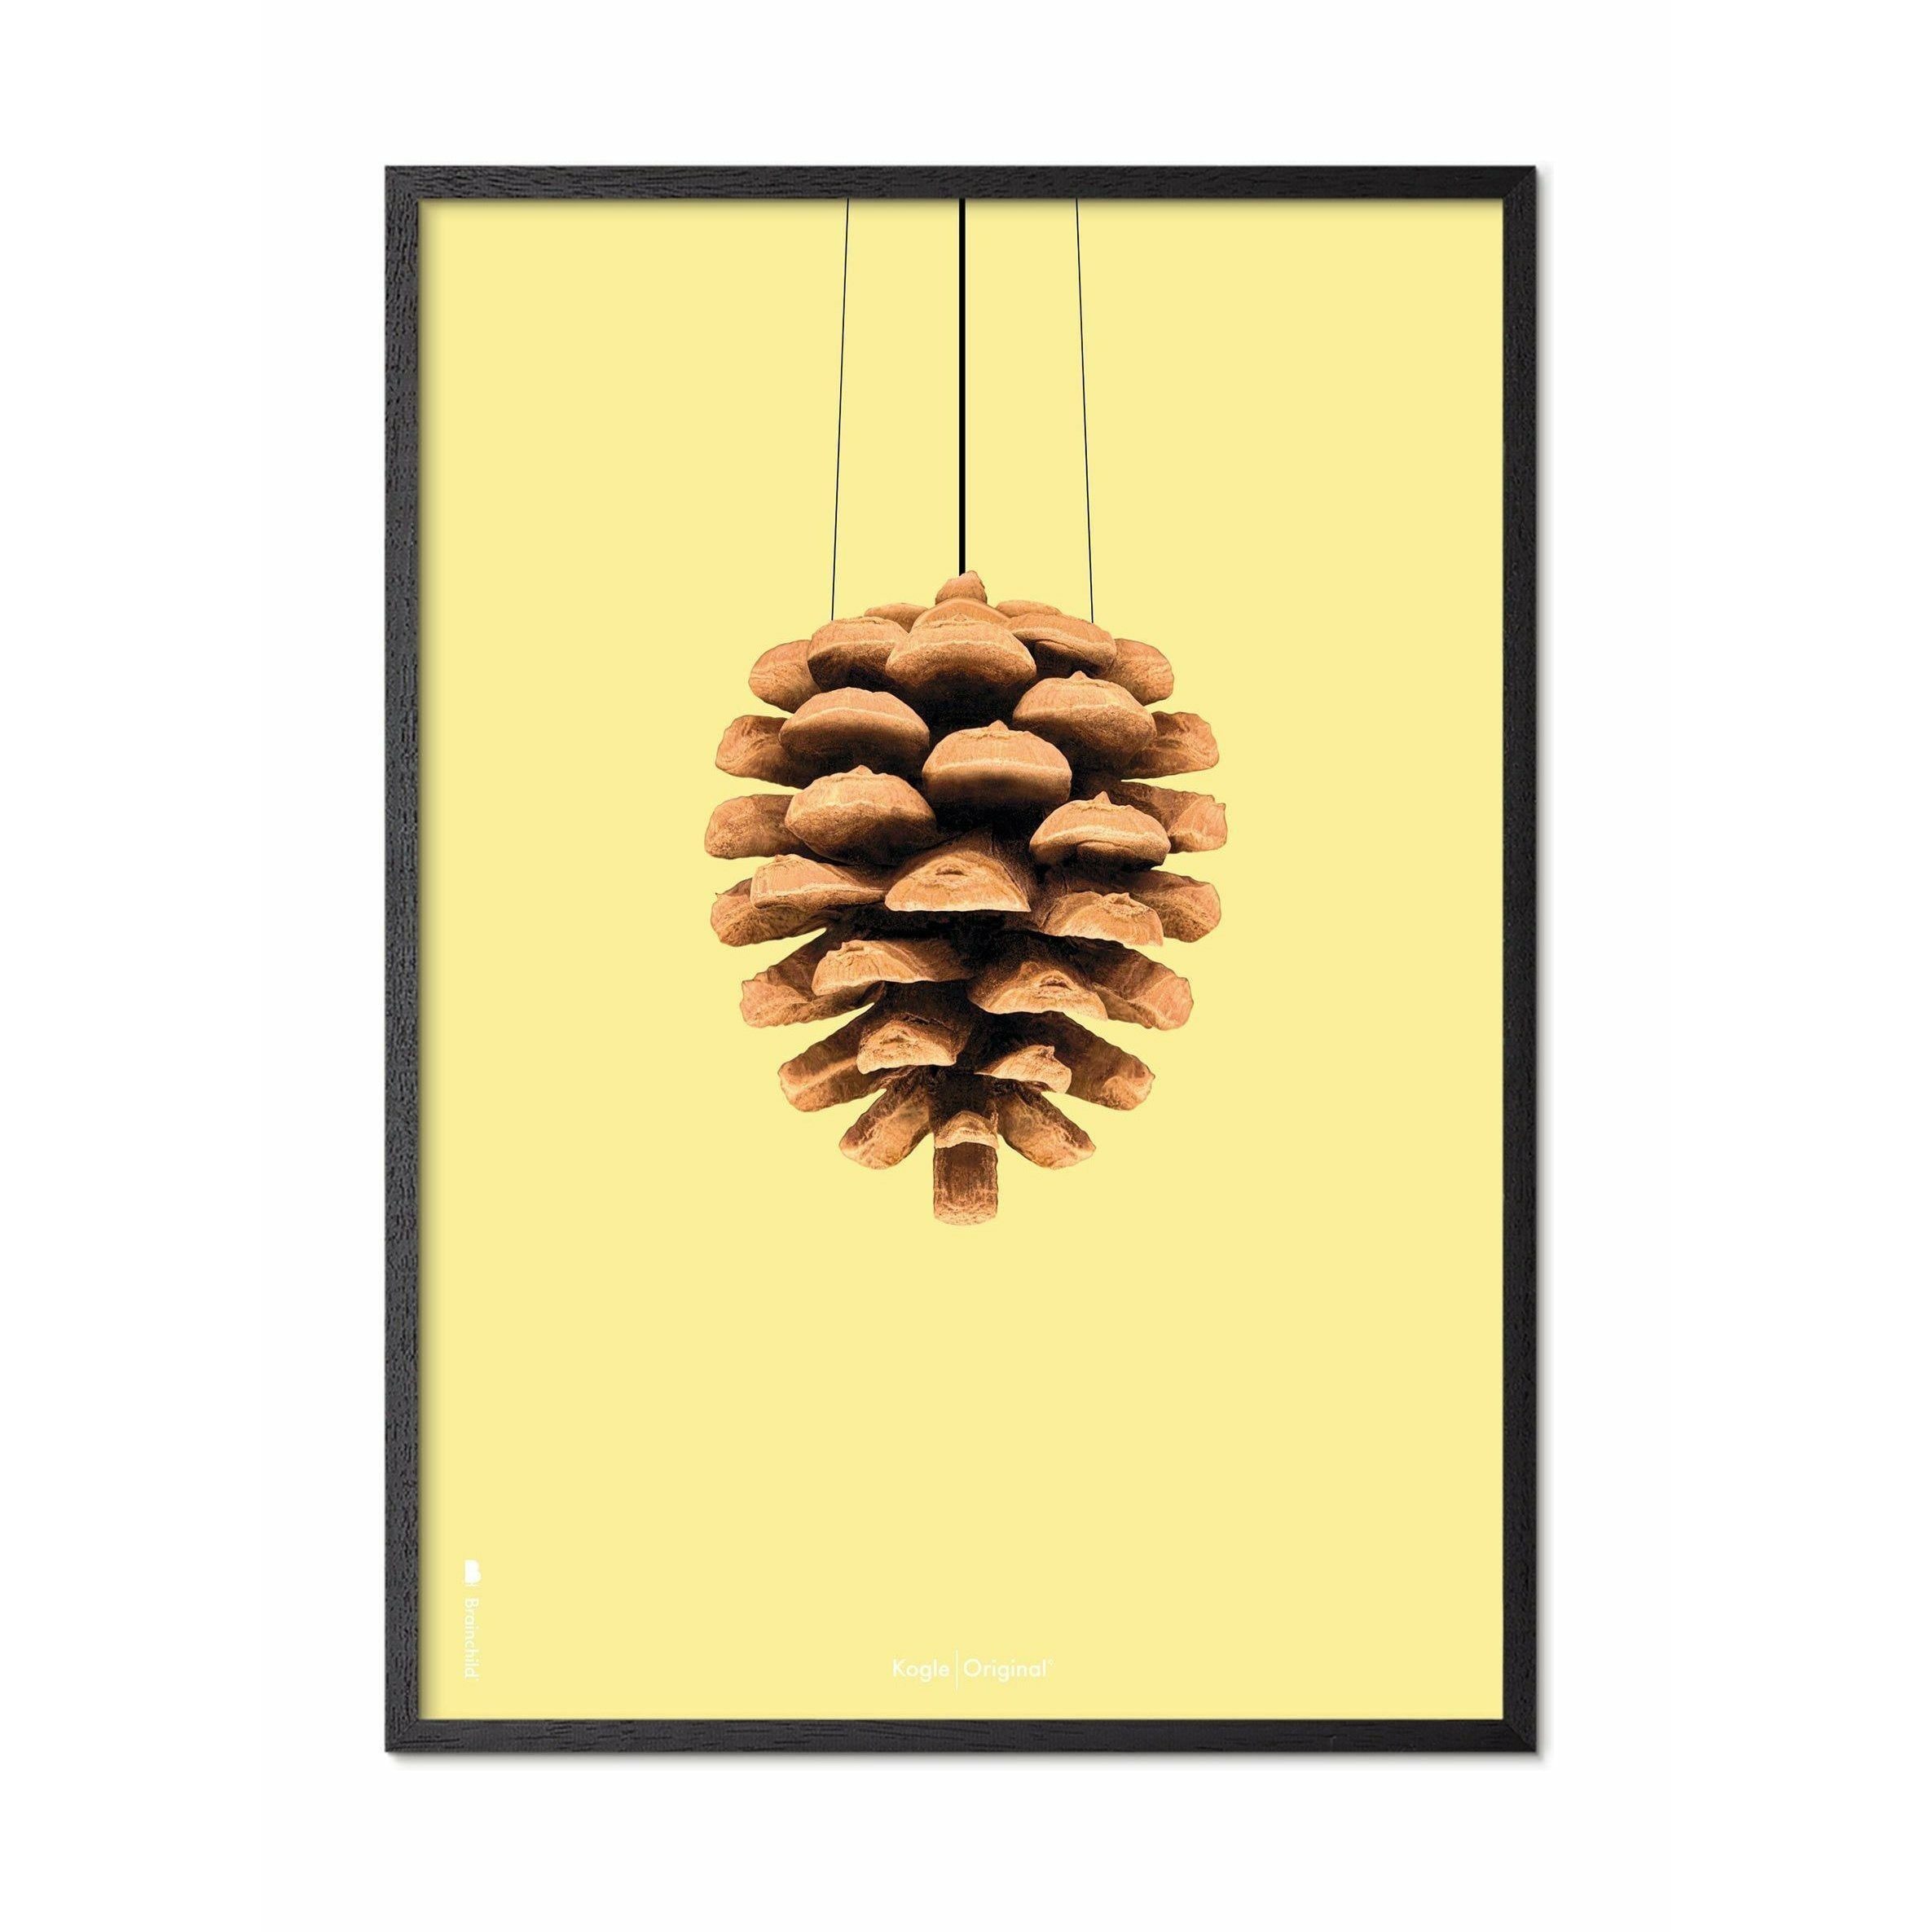 Brainchild Pine Cone Classic Poster, Frame In Black Lacquered Wood 30x40 Cm, Yellow Background